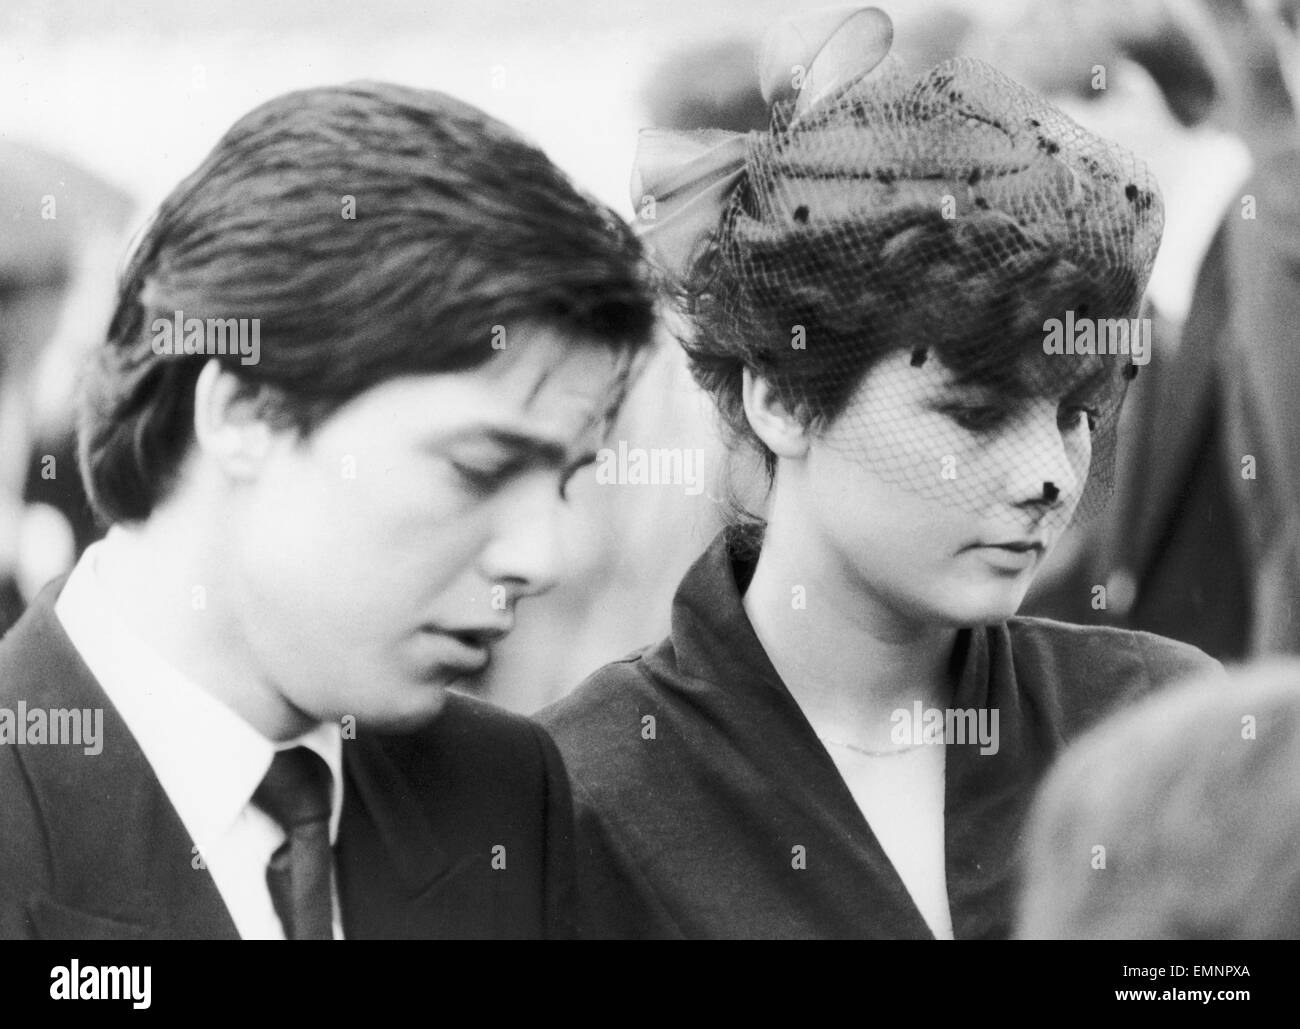 Download preview image - jeremy-bamber-and-his-girlfriend-julie-mugford-seen-here-at-the-funeral-EMNPXA